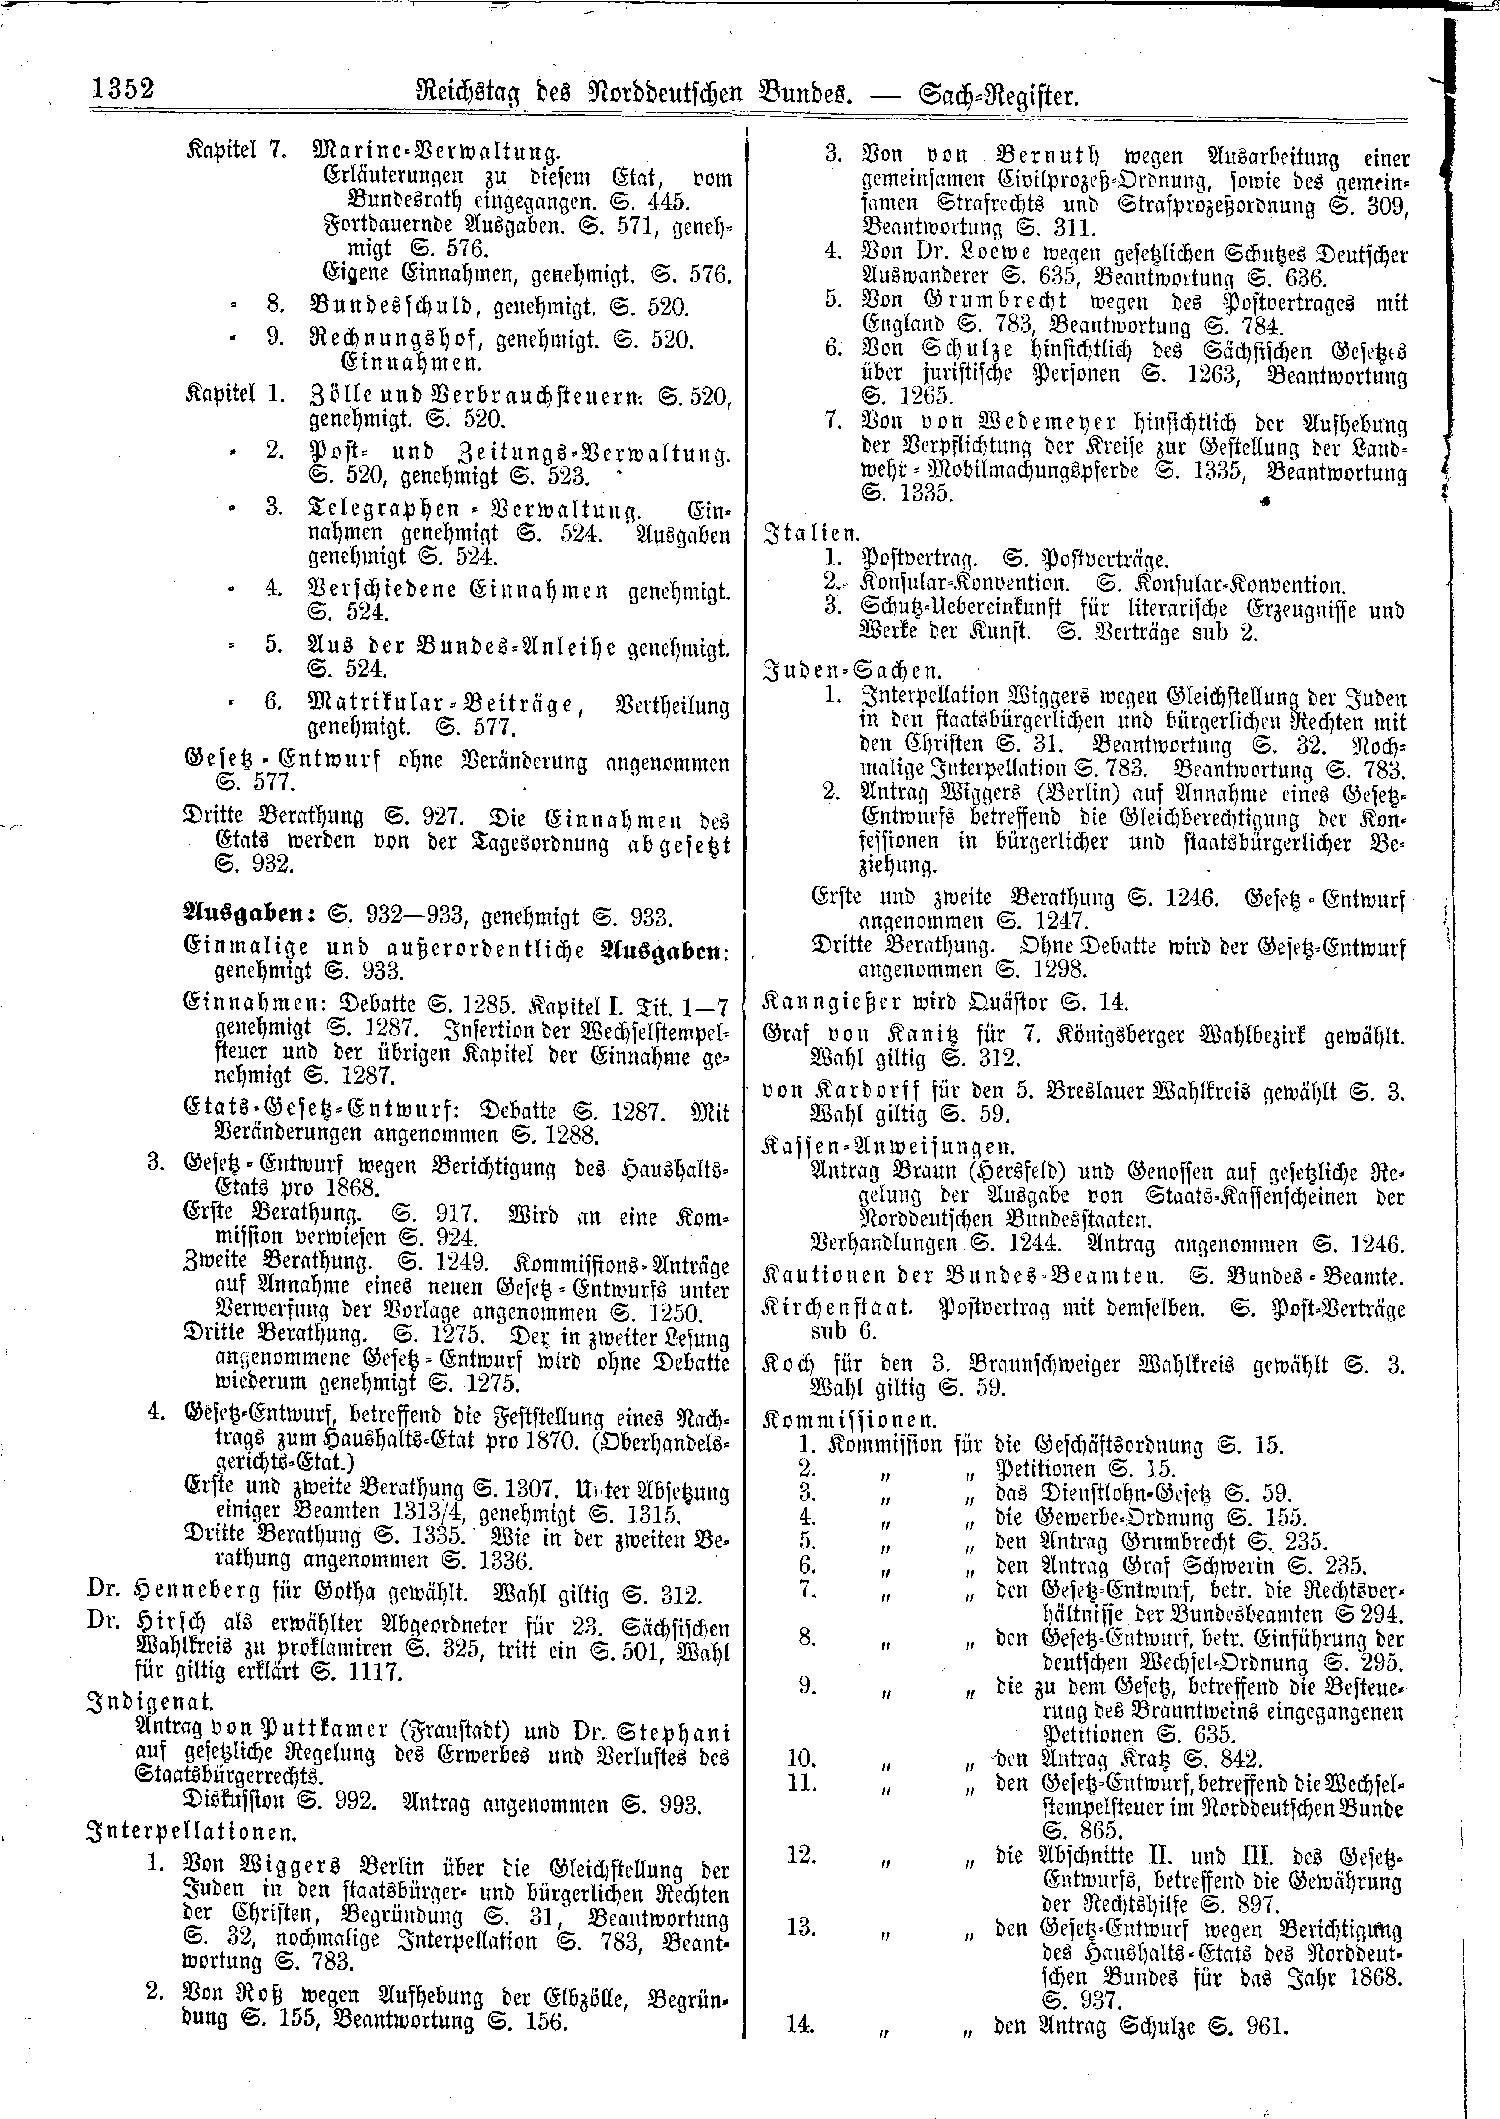 Scan of page 1352